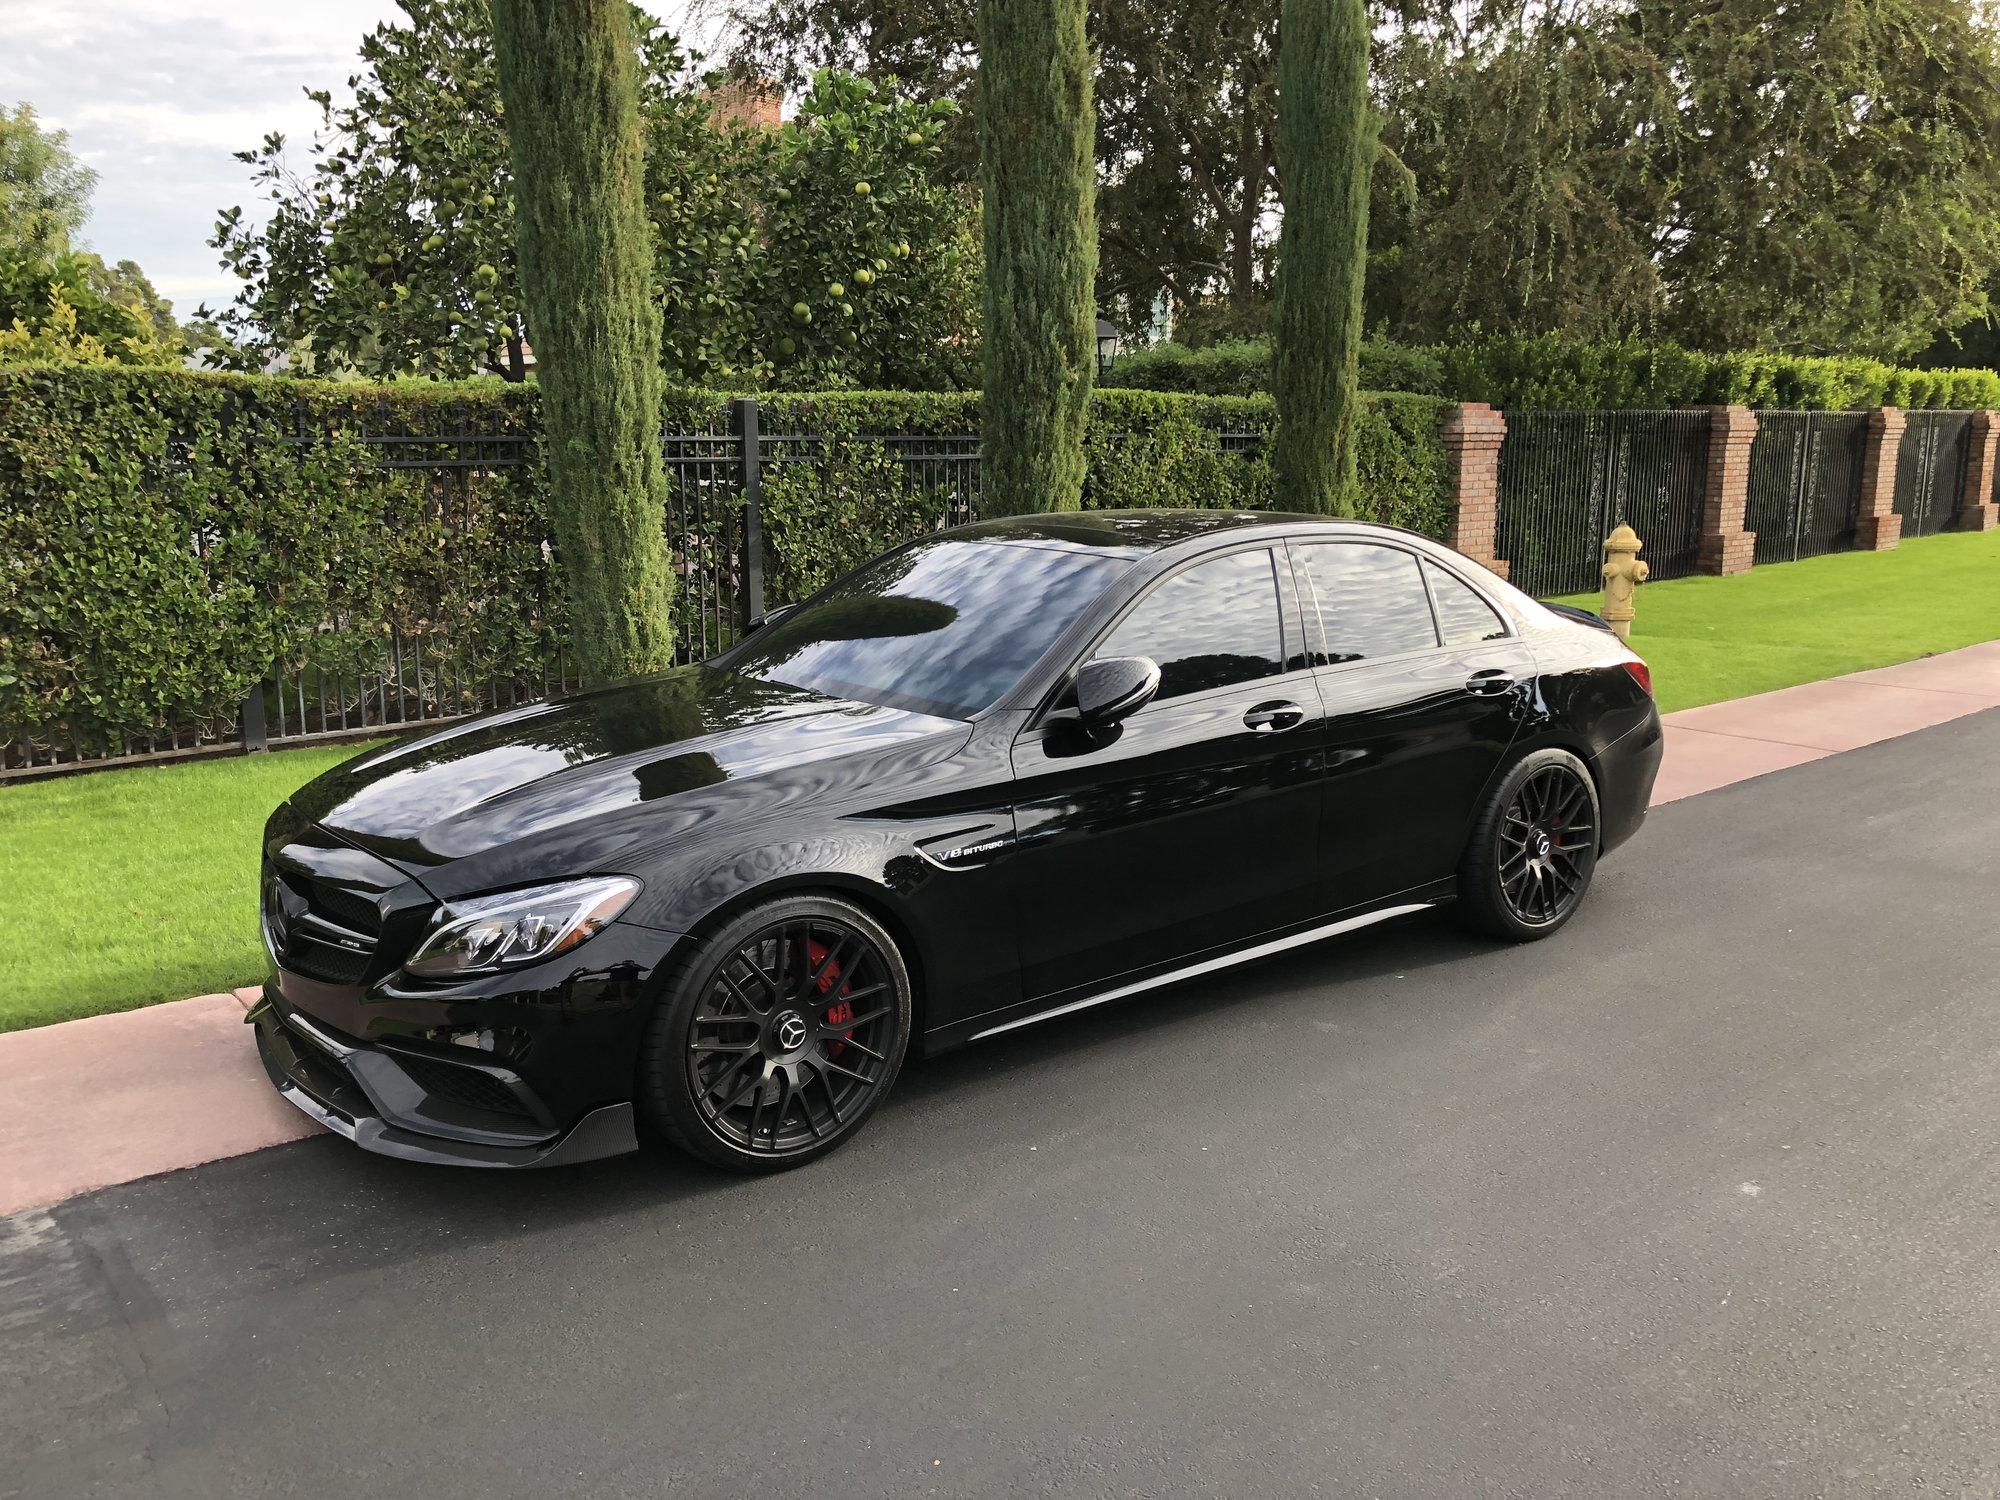 Wheels and Tires/Axles - 19" Mercedes-Benz AMG Forged Multi Spoke Powder Coated Black Wheels and Michelin PS4S - Used - 2008 to 2014 Mercedes-Benz C63 AMG - Scottsdale, AZ 85254, United States